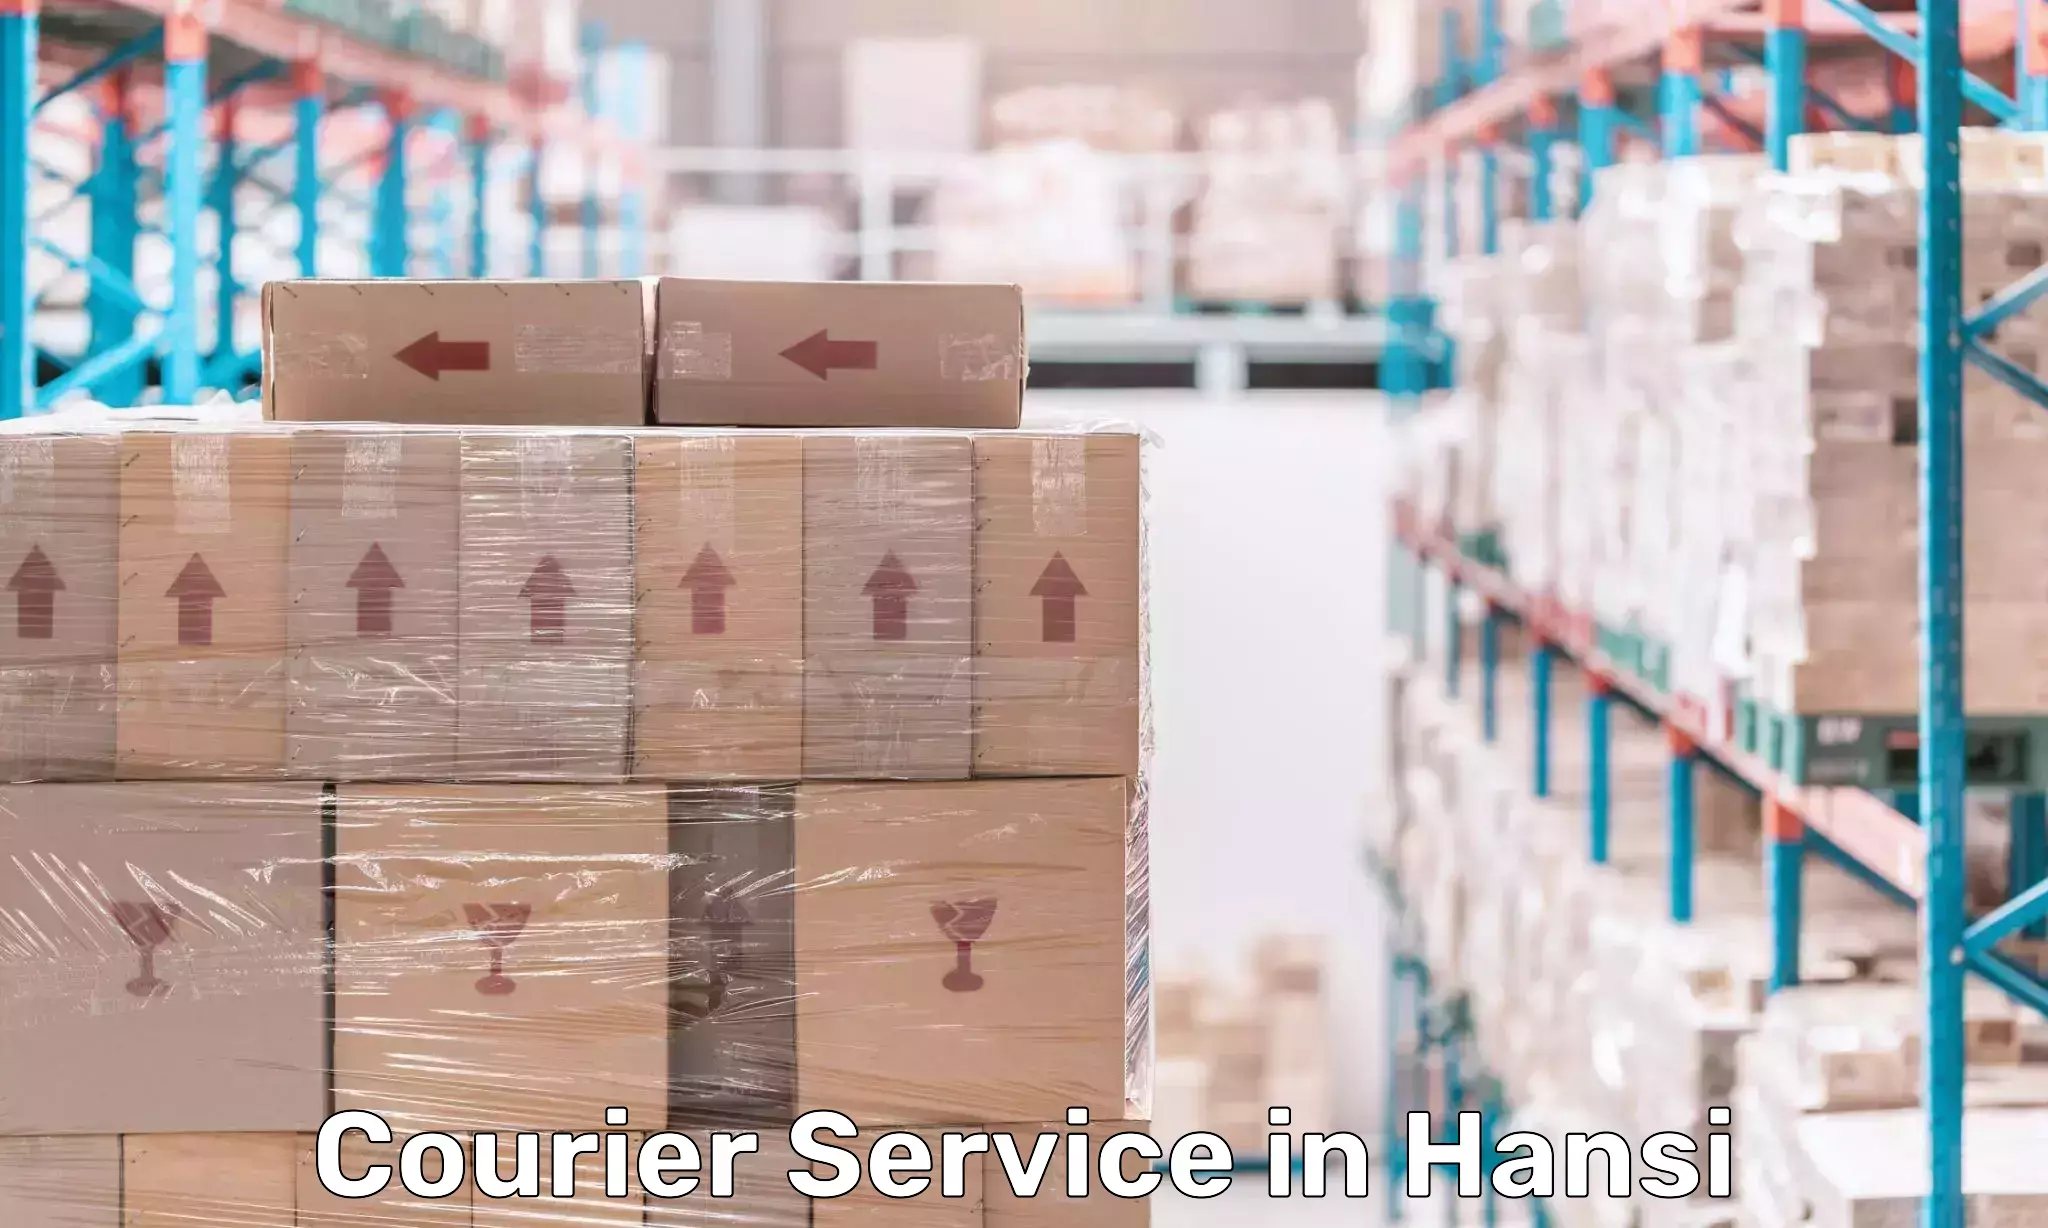 State-of-the-art courier technology in Hansi